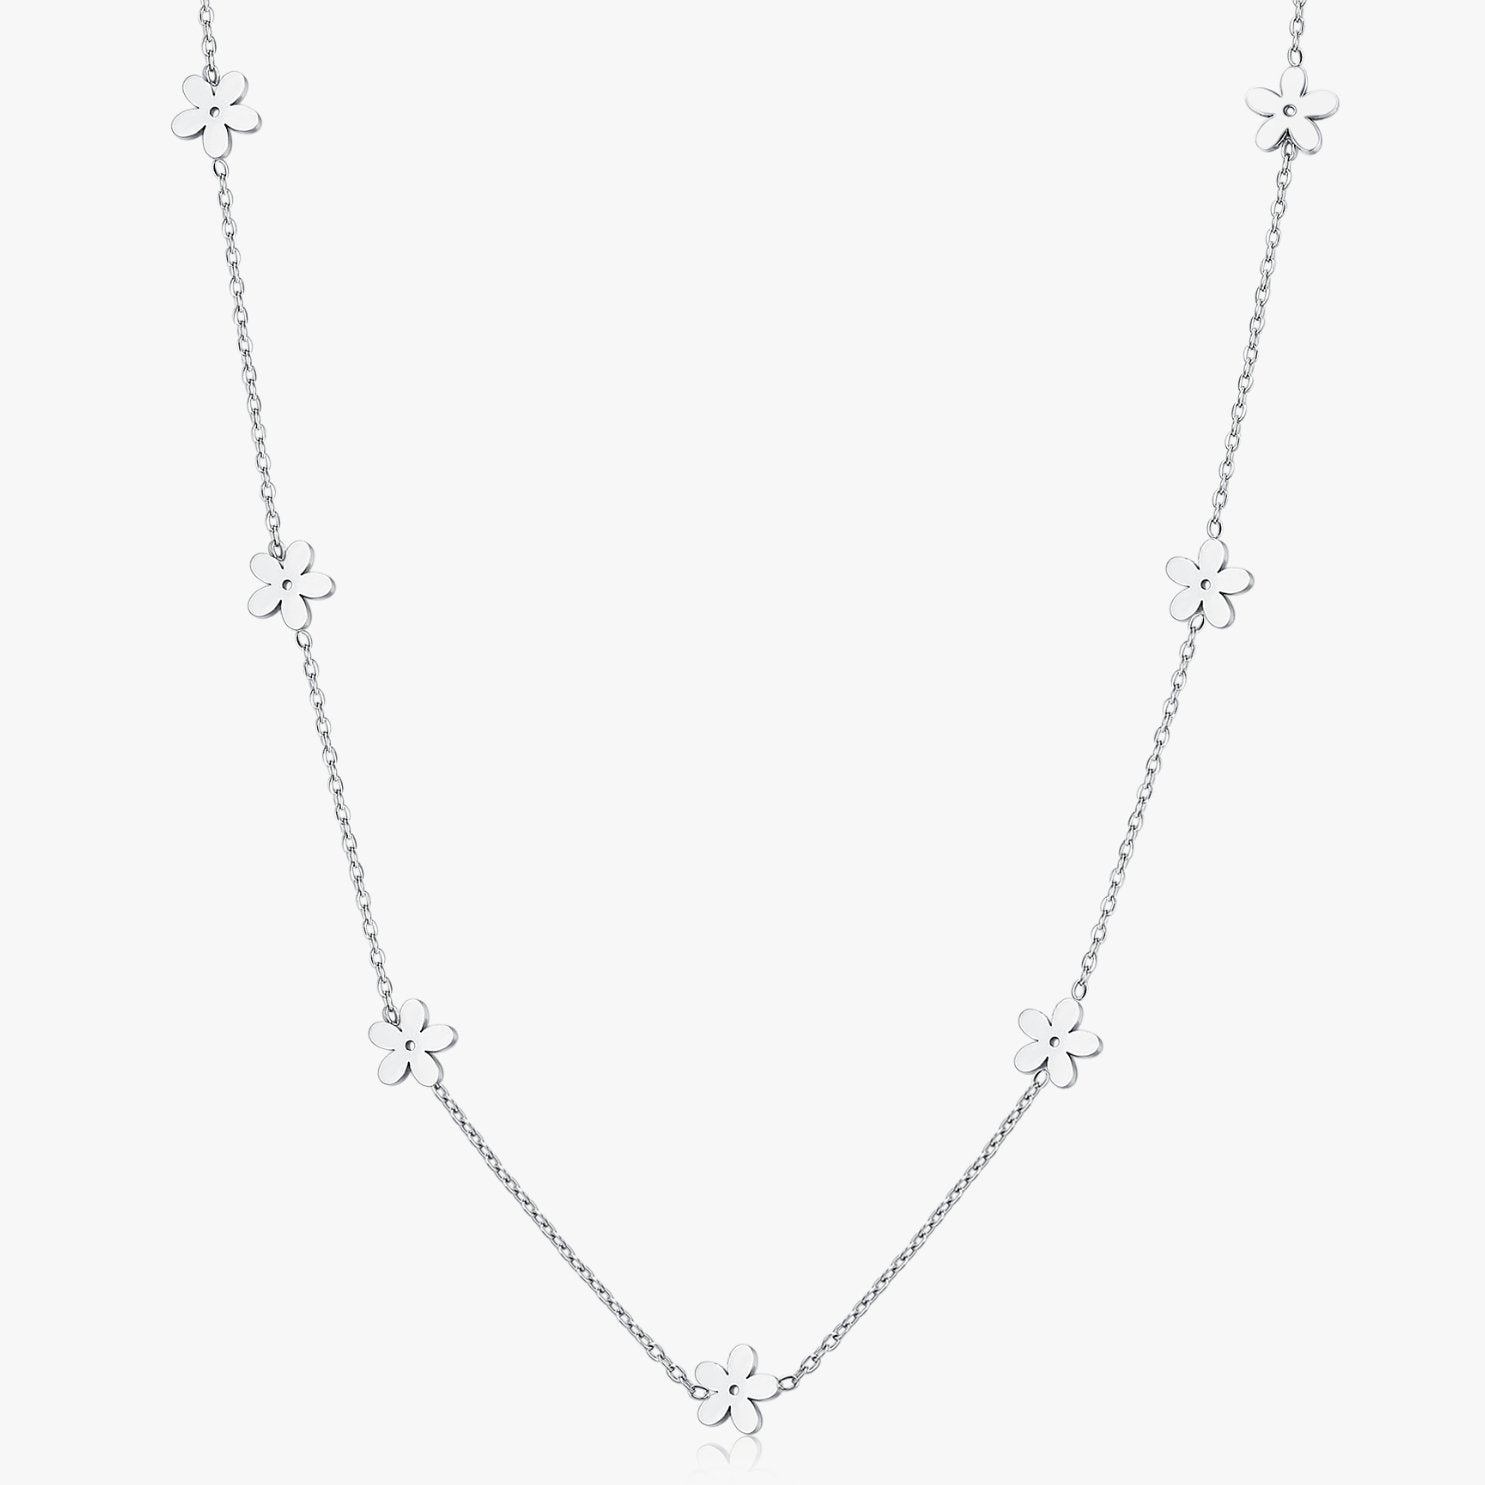 Simply Floral Choker Necklace in Silver - Flaire & Co.